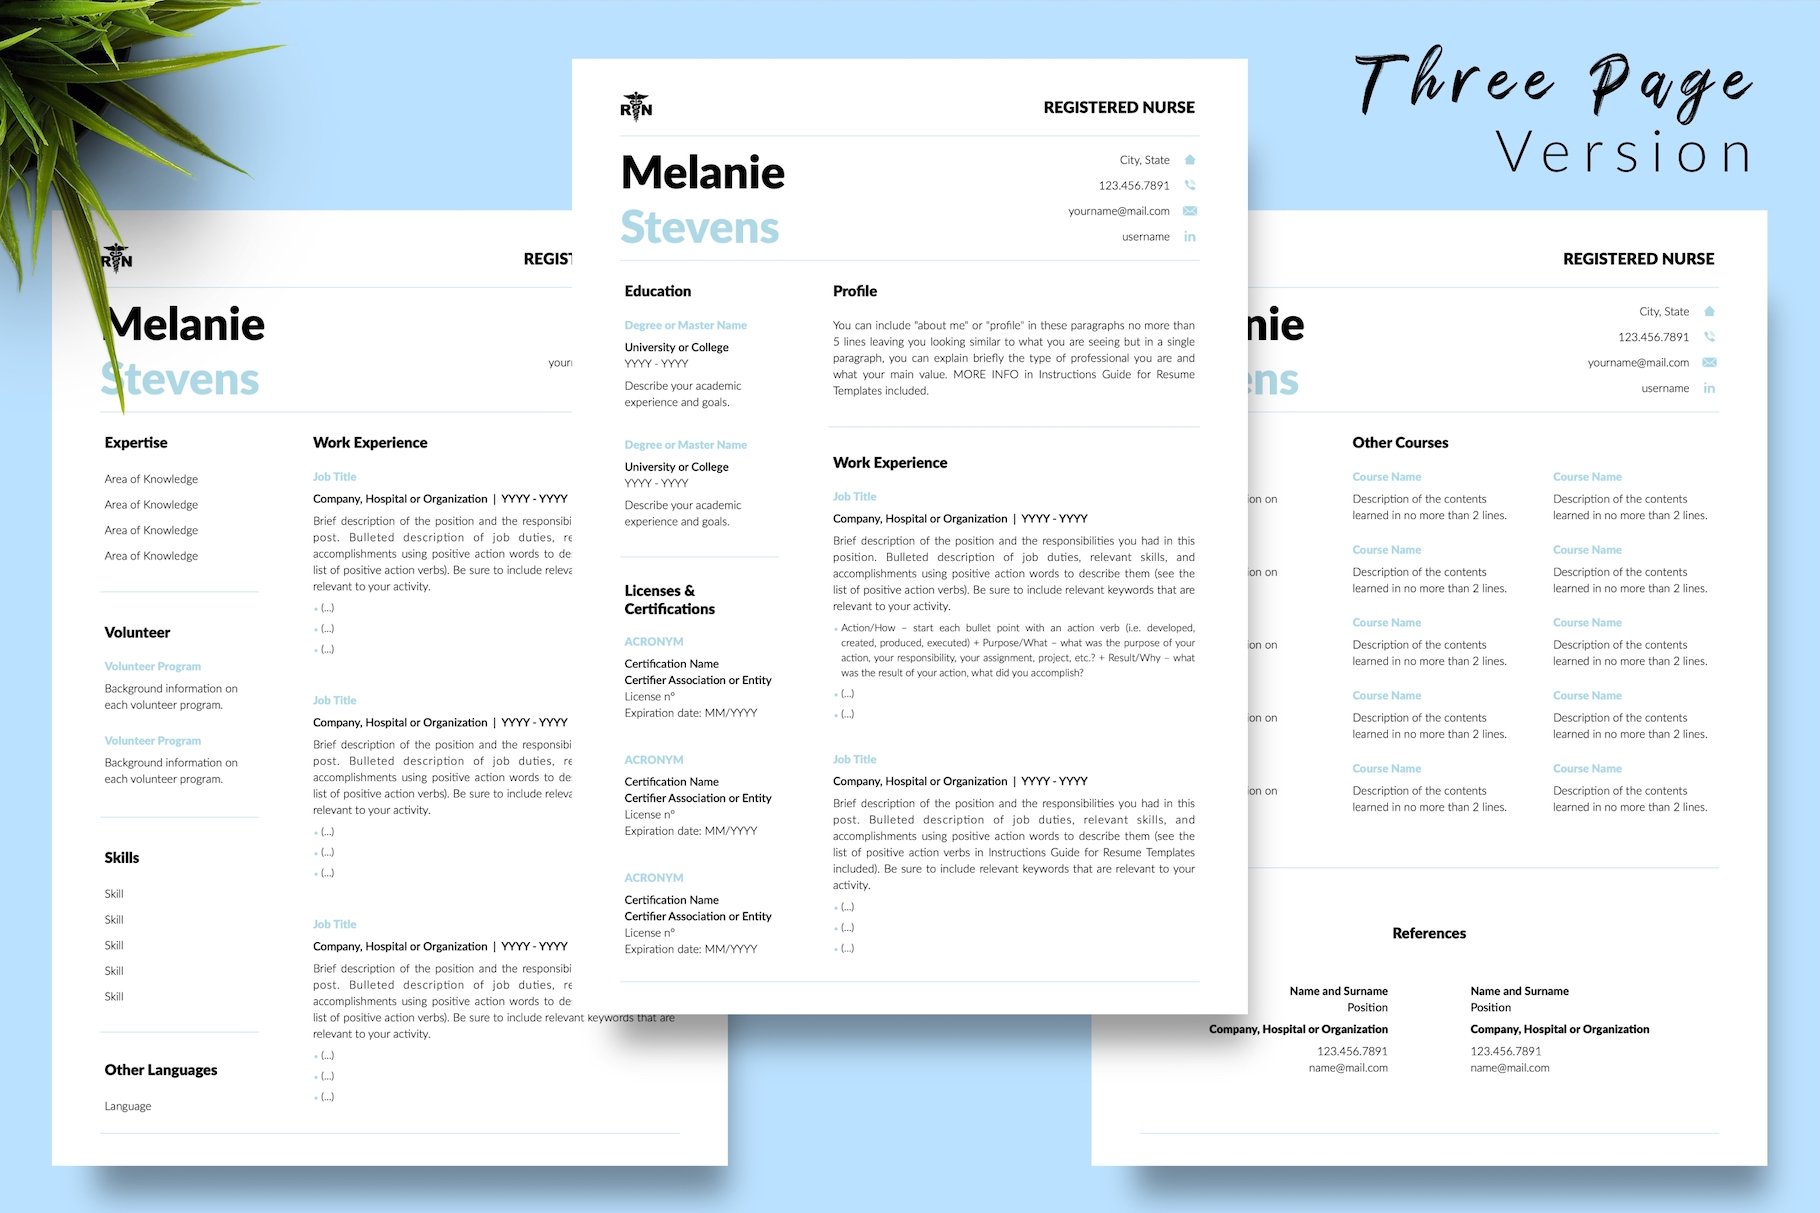 Two pages of a resume on a blue background.